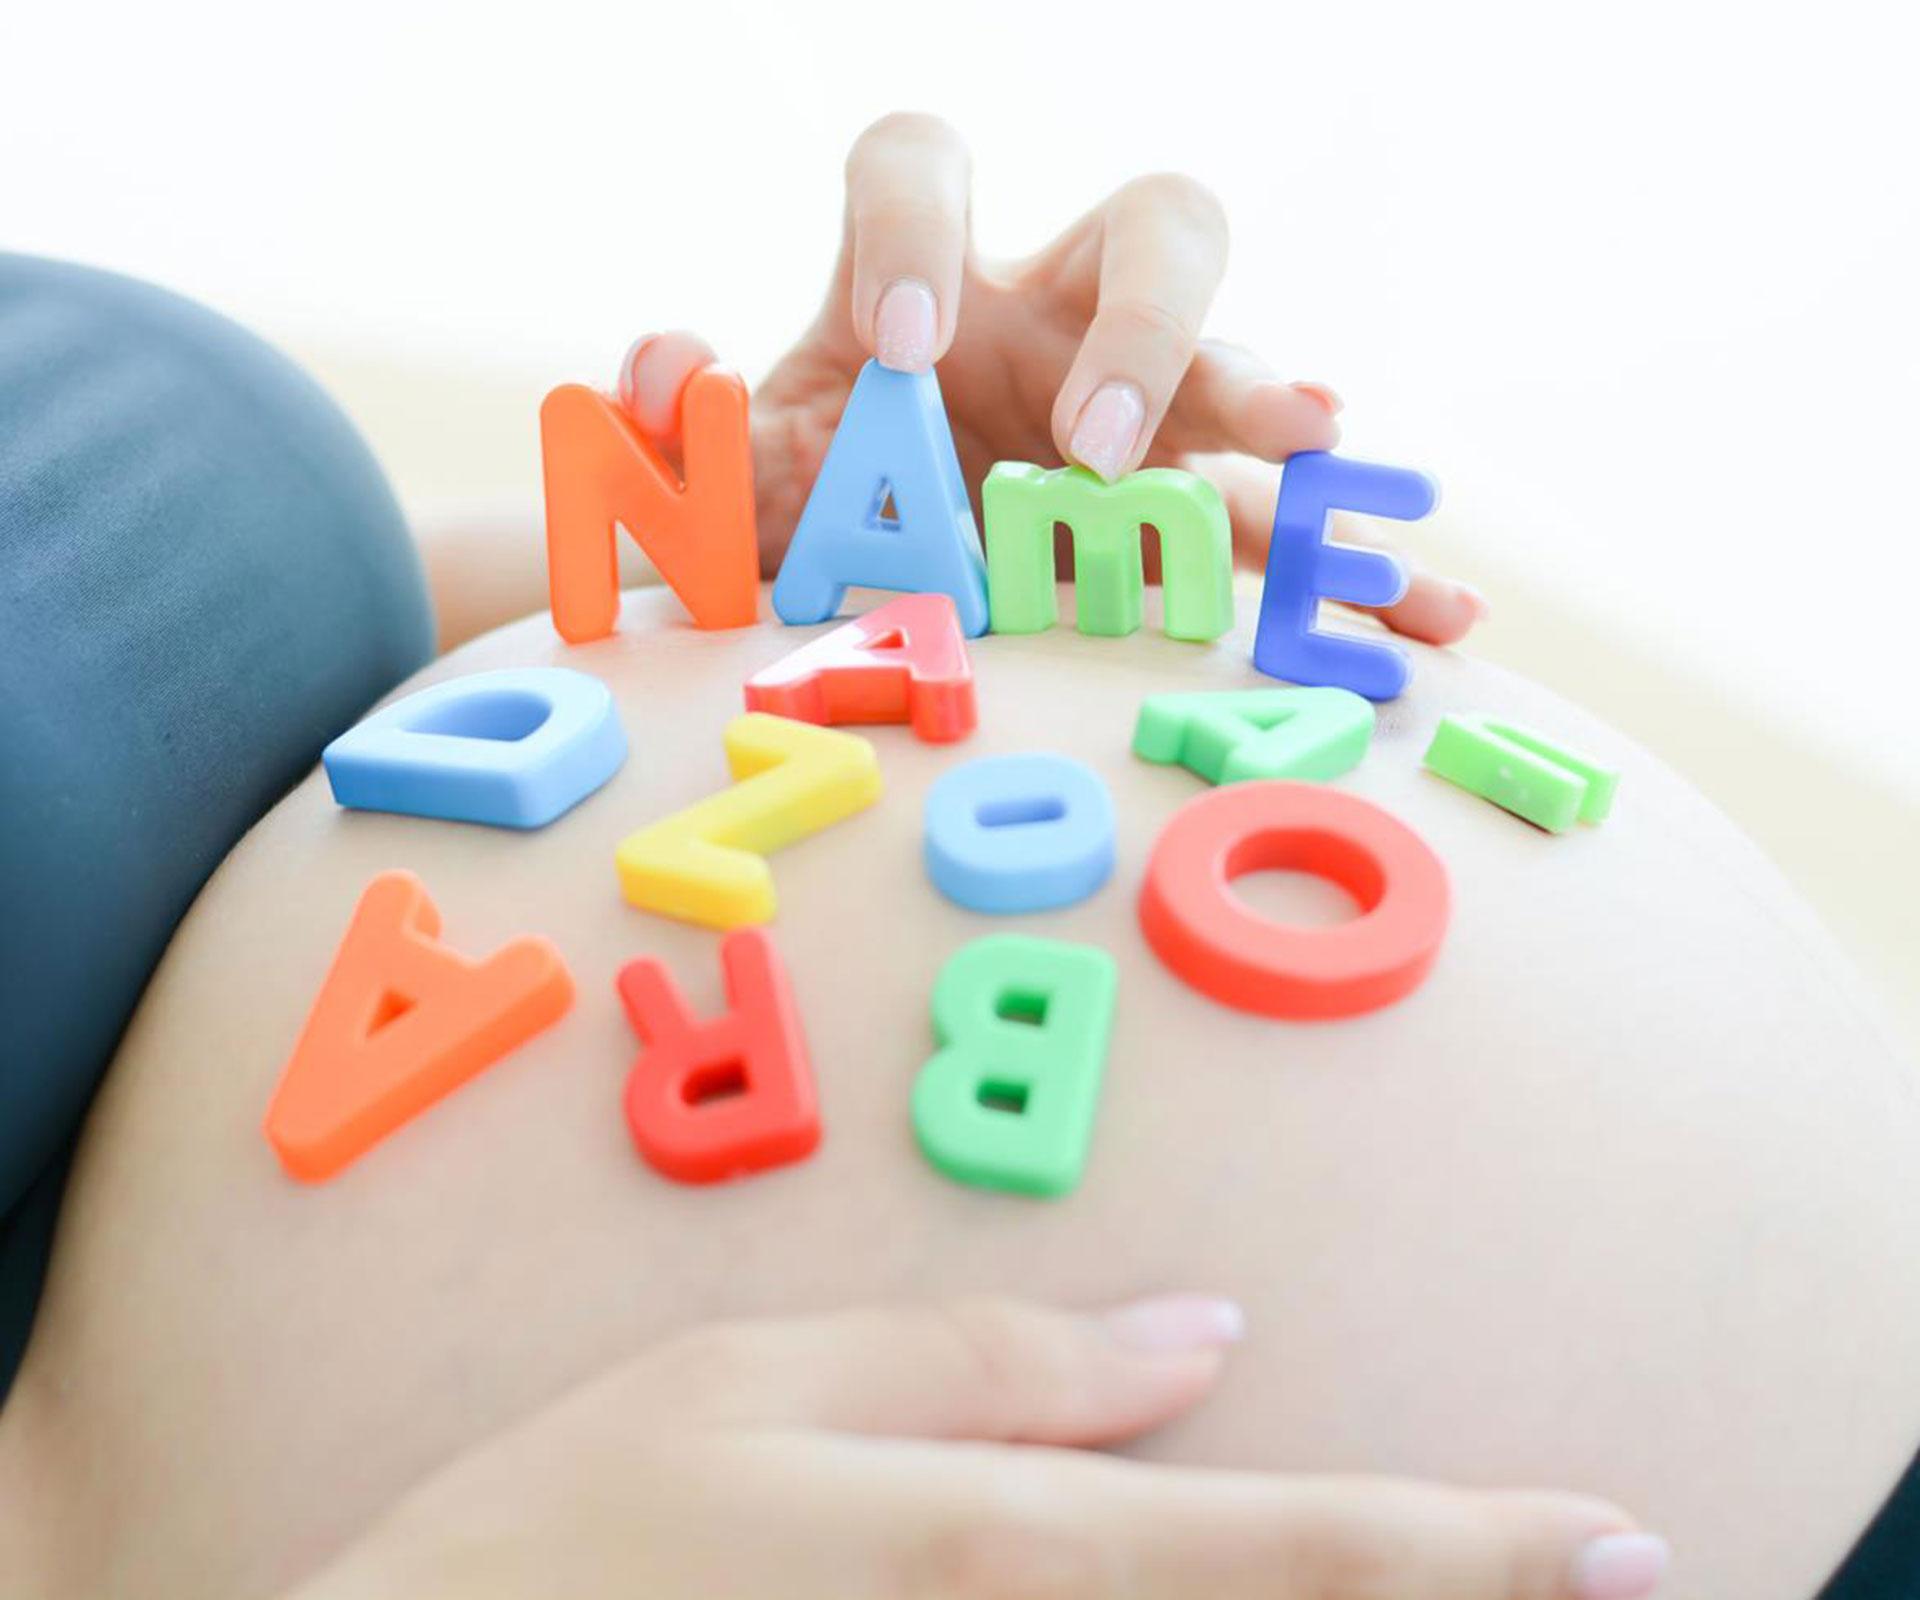 Baby-naming experts top picks for 2017